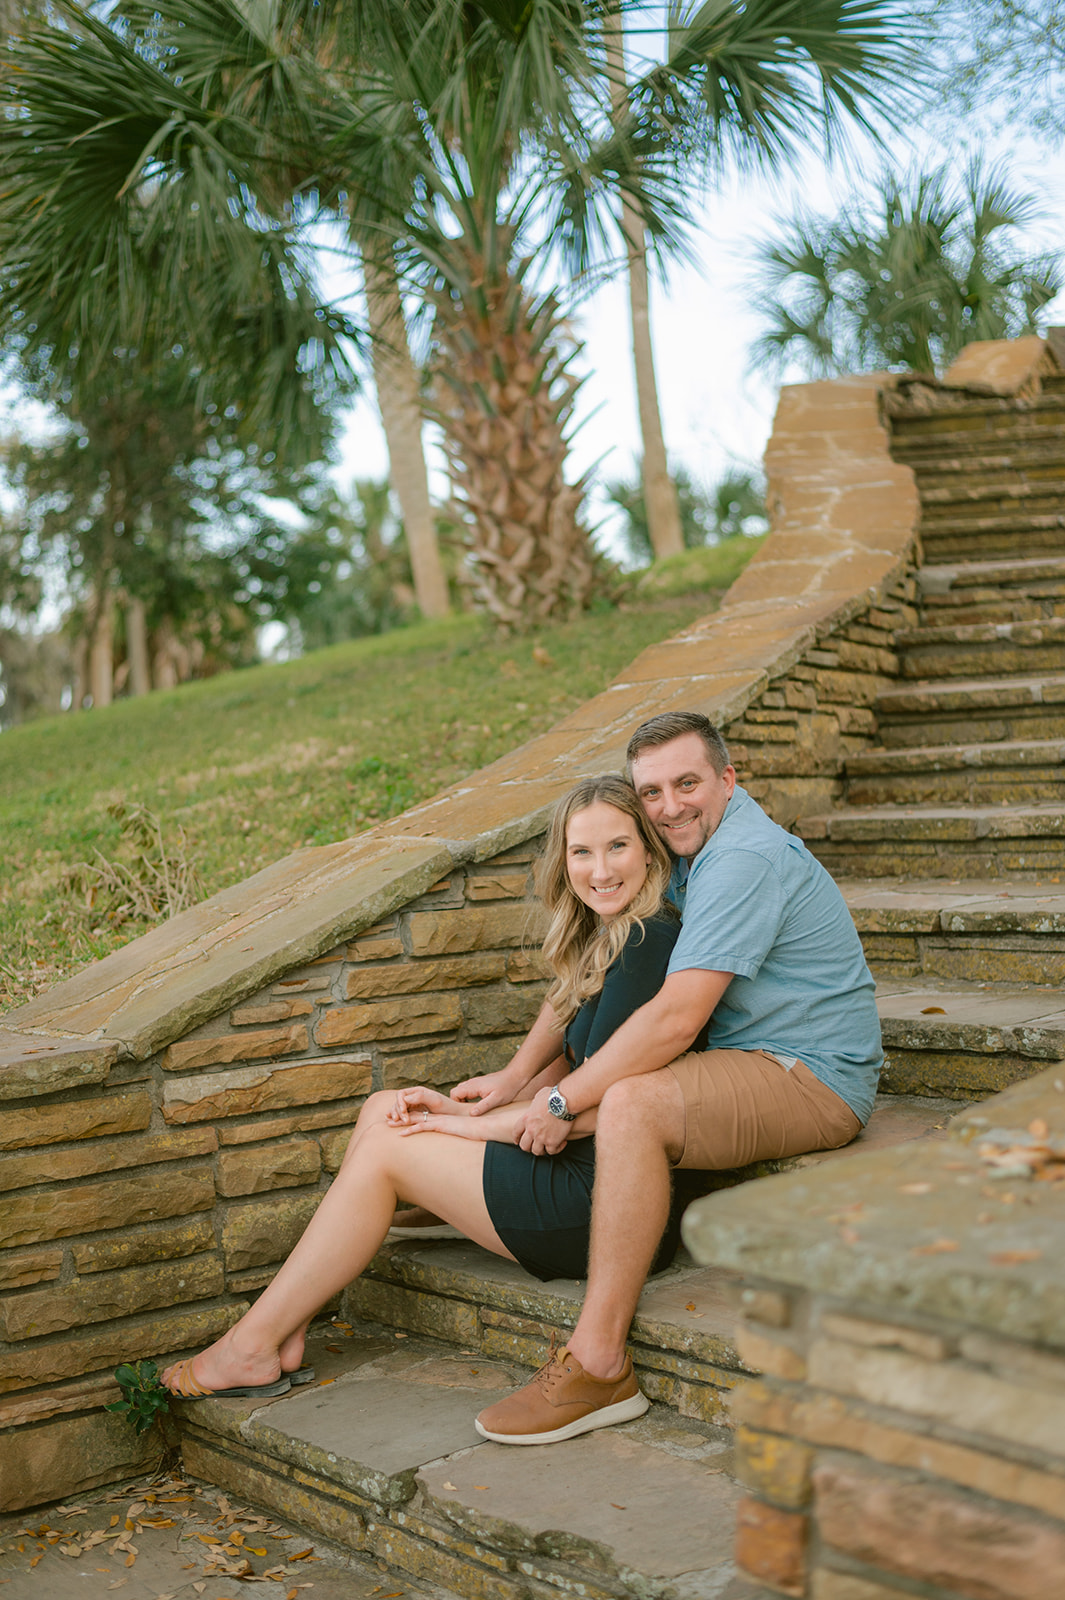 "Breezy engagement photo with stunning water views in Tampa"
